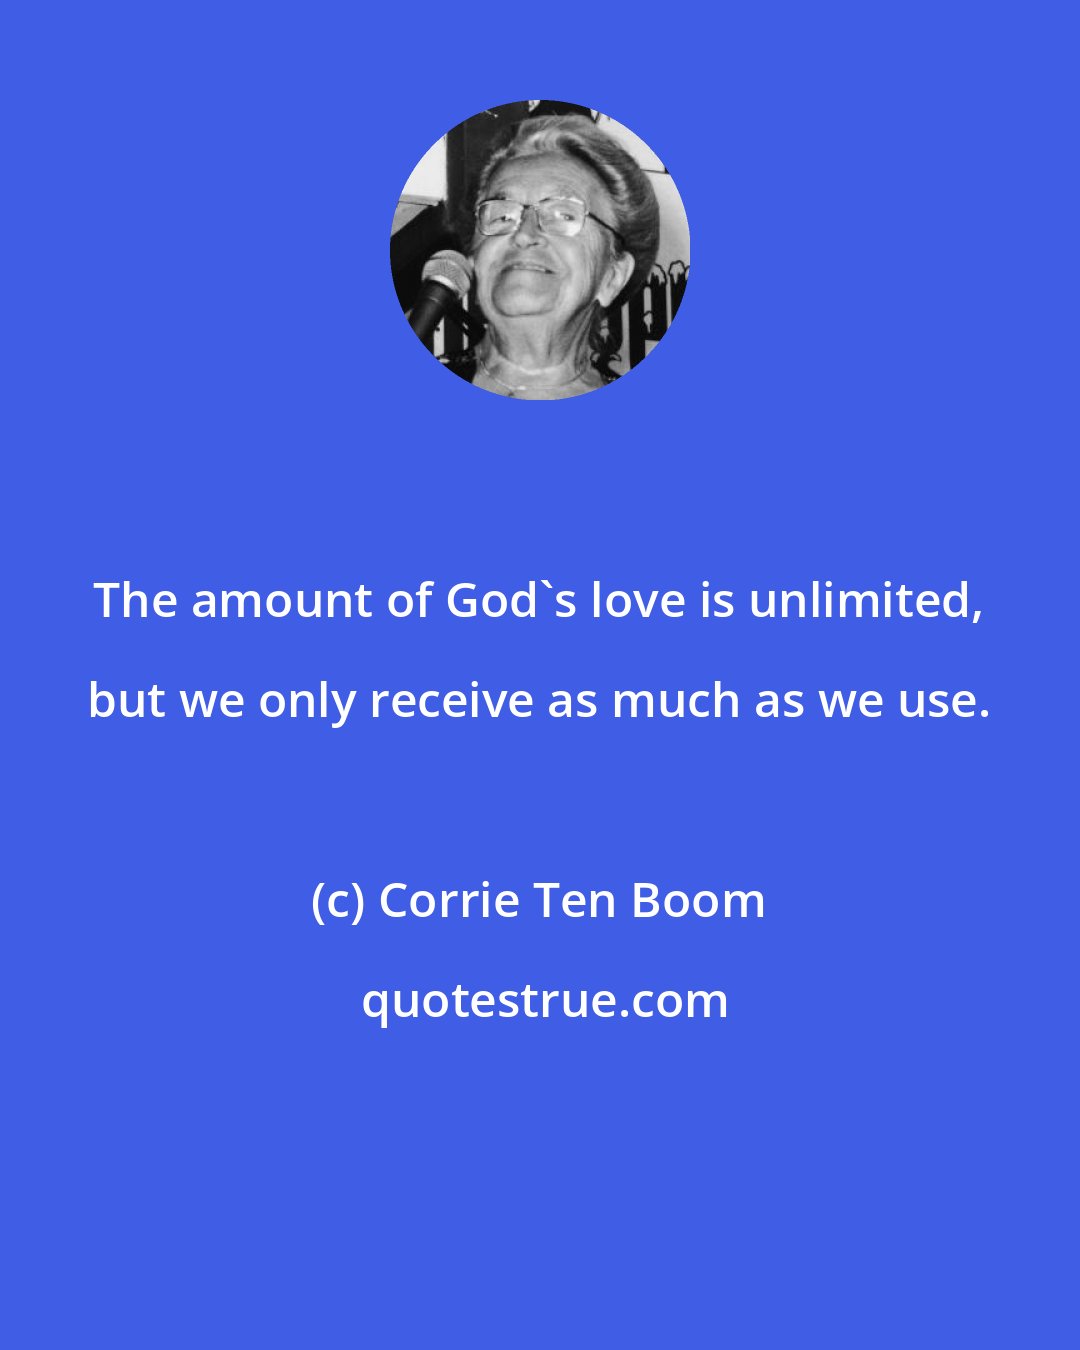 Corrie Ten Boom: The amount of God's love is unlimited, but we only receive as much as we use.